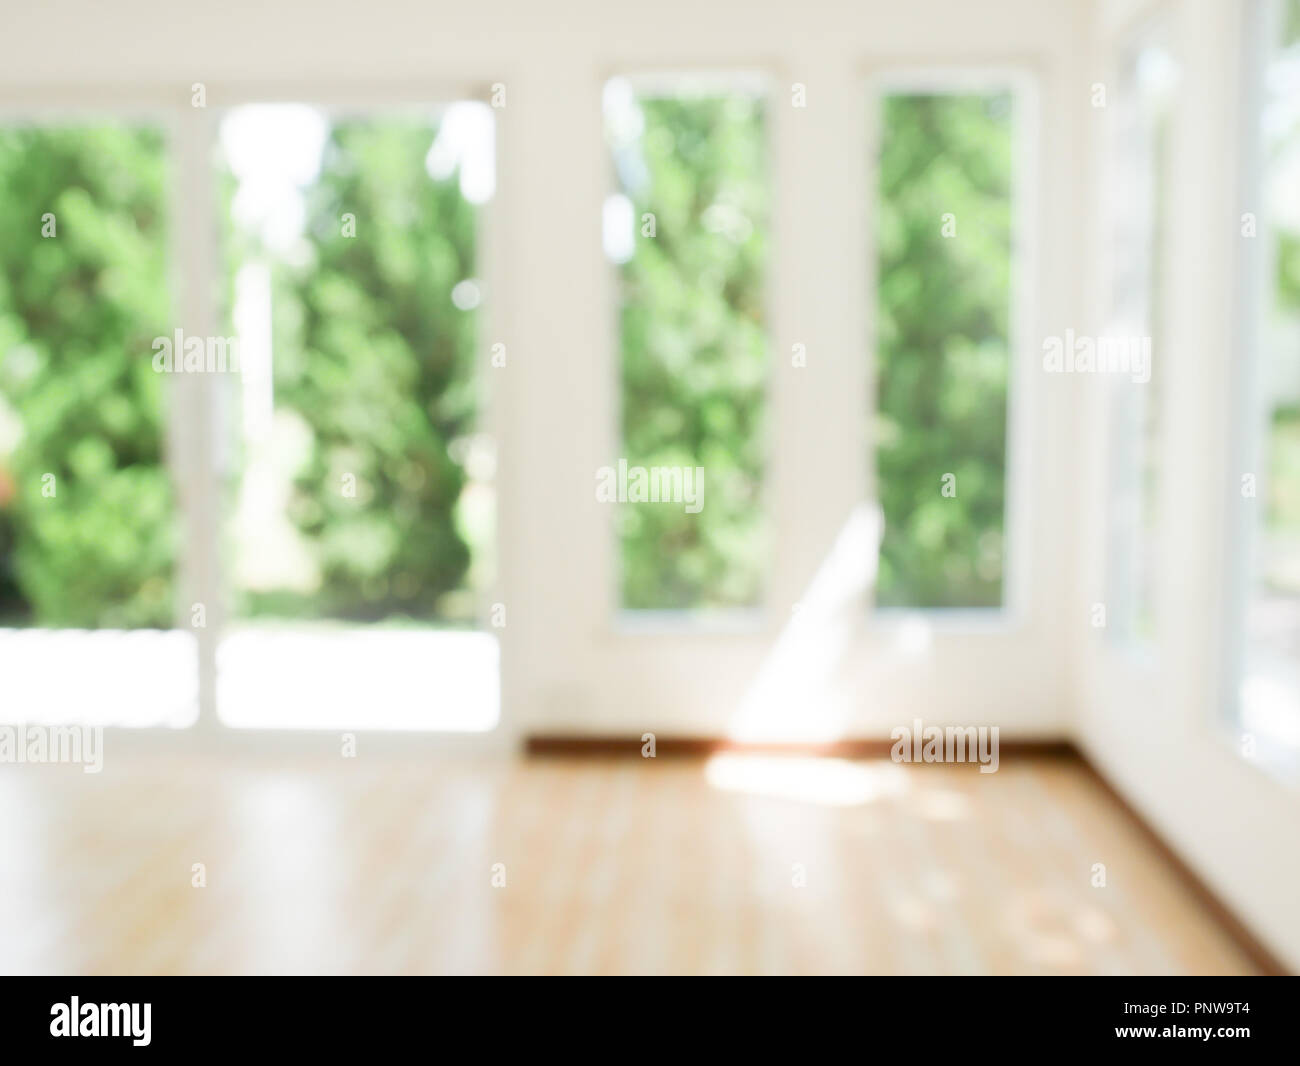 Abstract background Blur Modern living room Stock Photo - Alamy